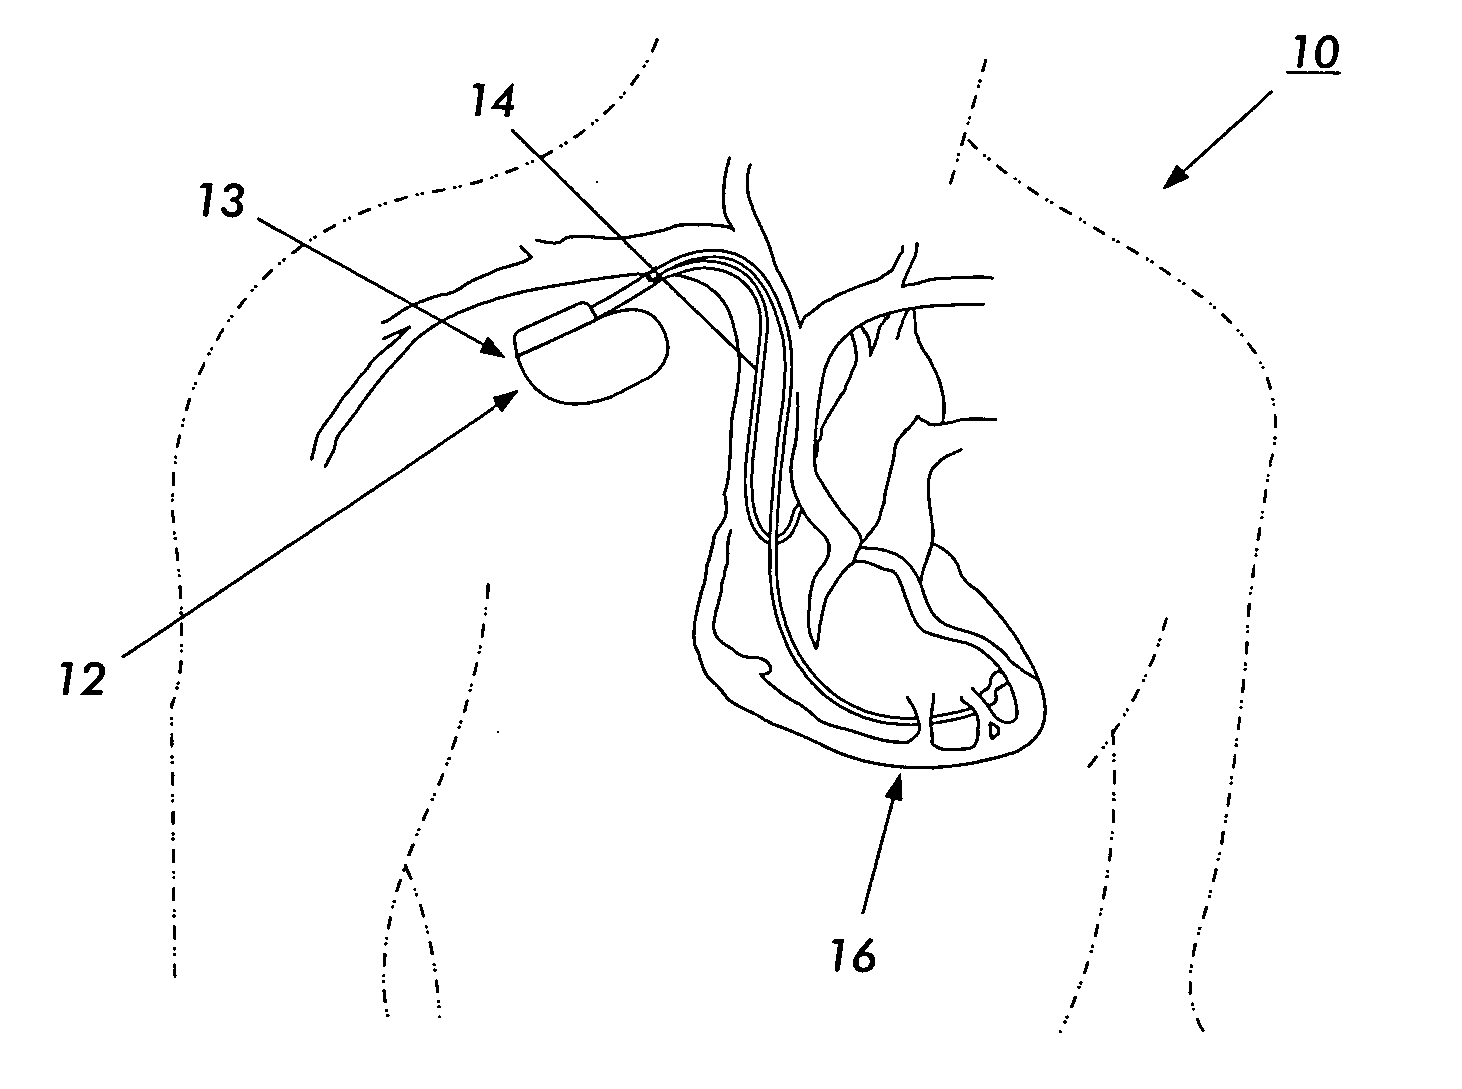 Medical device with an electrically conductive anti-antenna geometrical shaped member